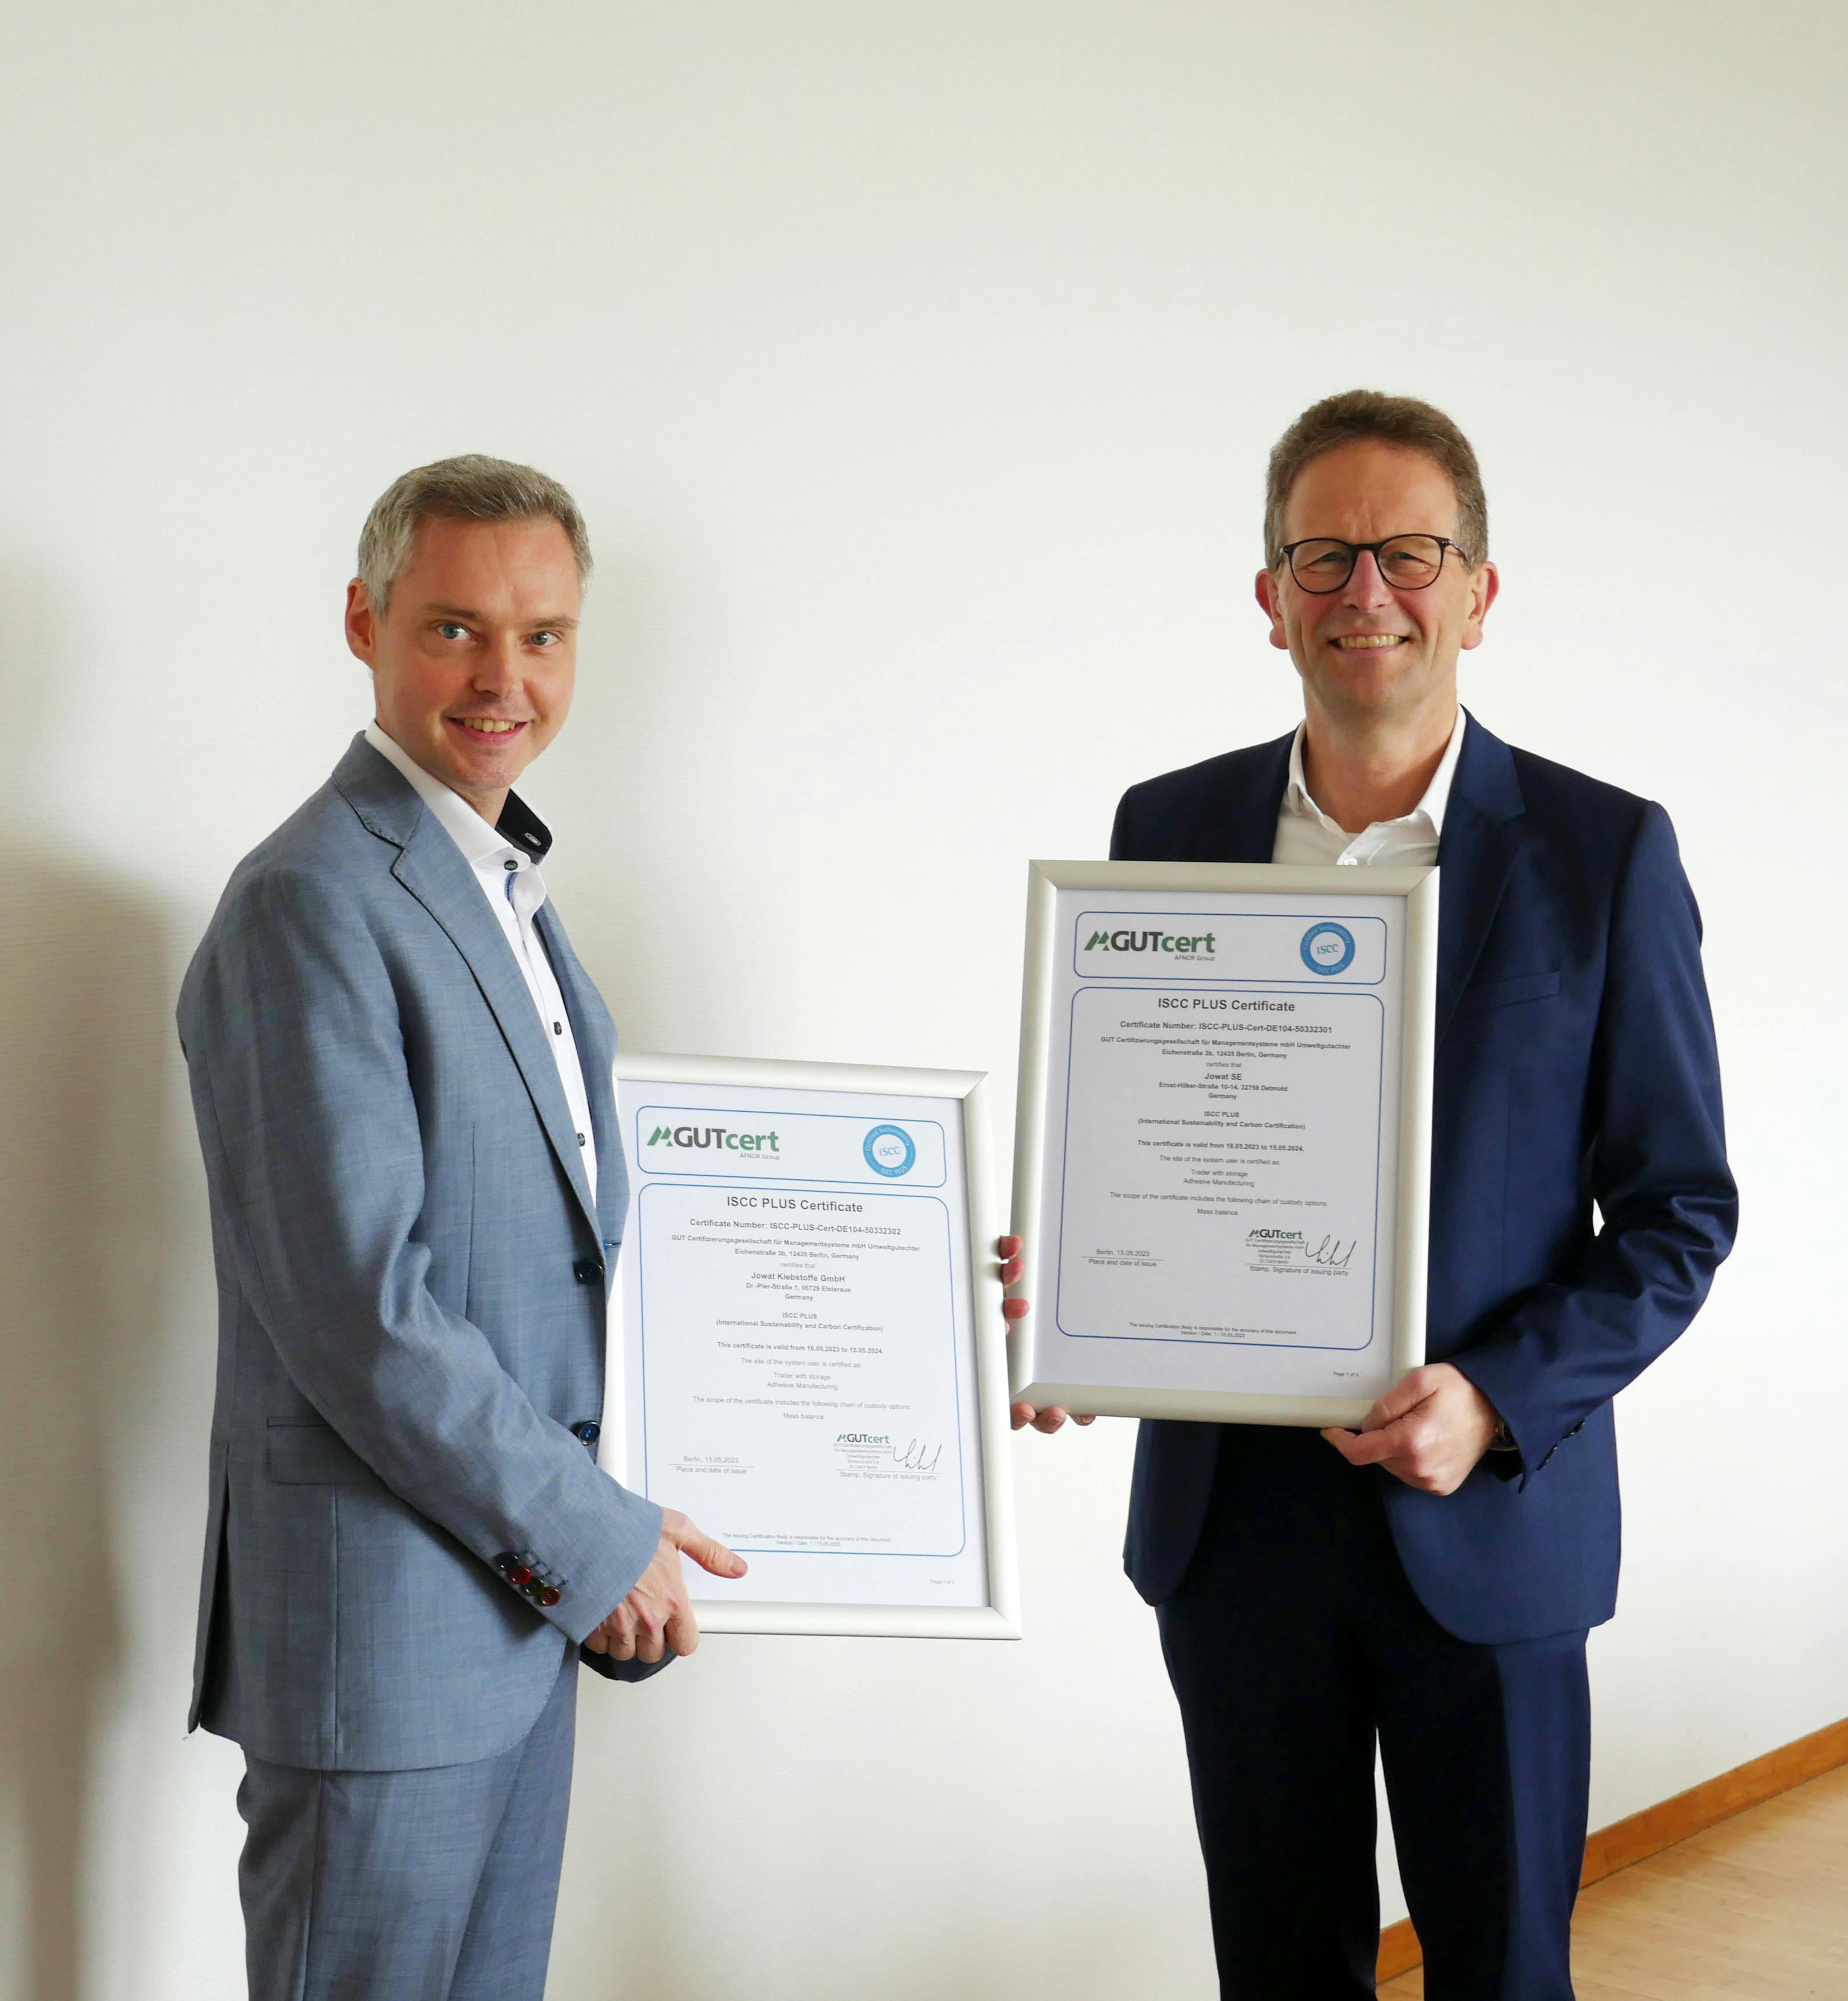 The adhesive manufacturer Jowat receives the ISCC PLUS certification for its plants in Detmold and Elsteraue. Left to right: Manuel-Robert Meier, Head of Management Systems, and Dr. Christian Terfloth, member of the Board of Directors.